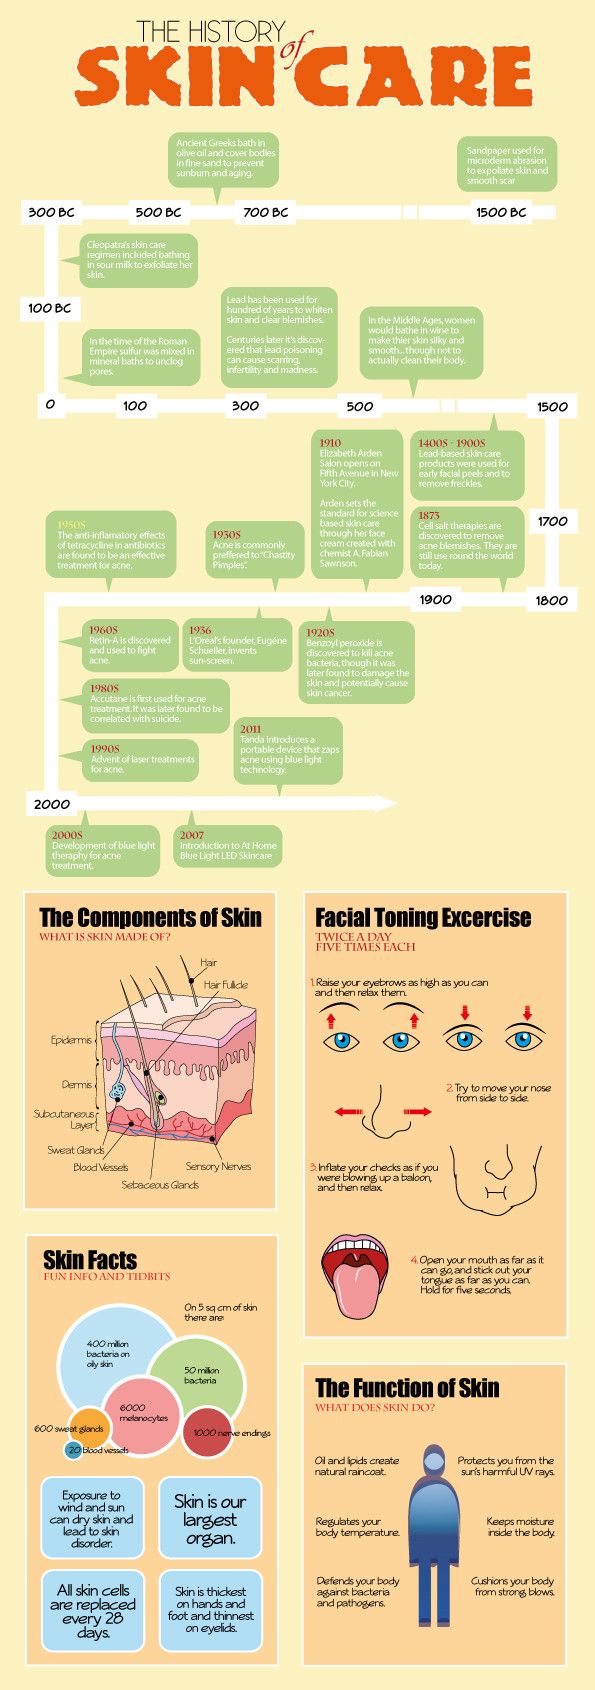 The History of Skincare